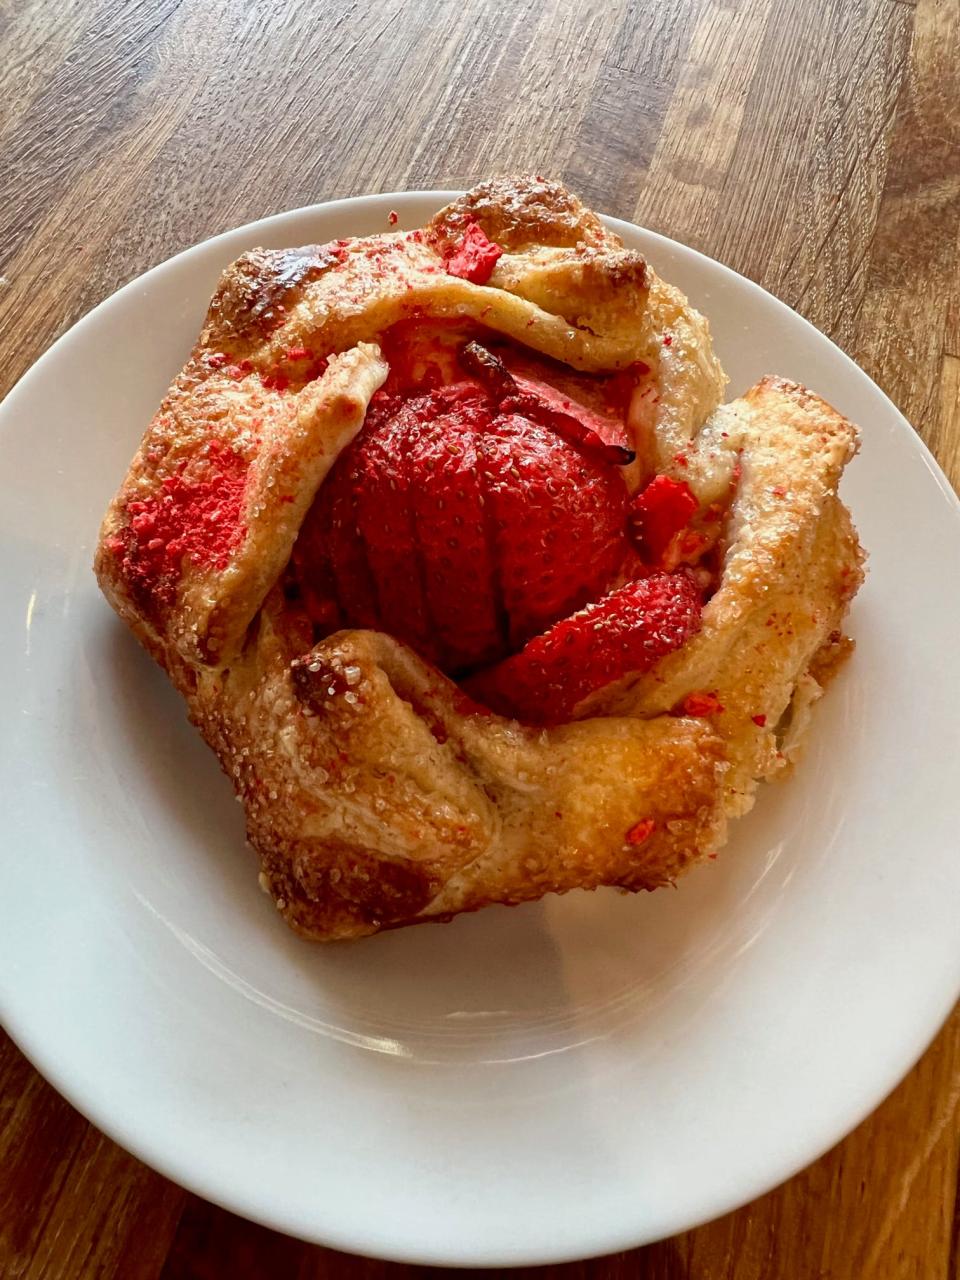 Strawberry galette from 1748 Bakehouse in Springfield.